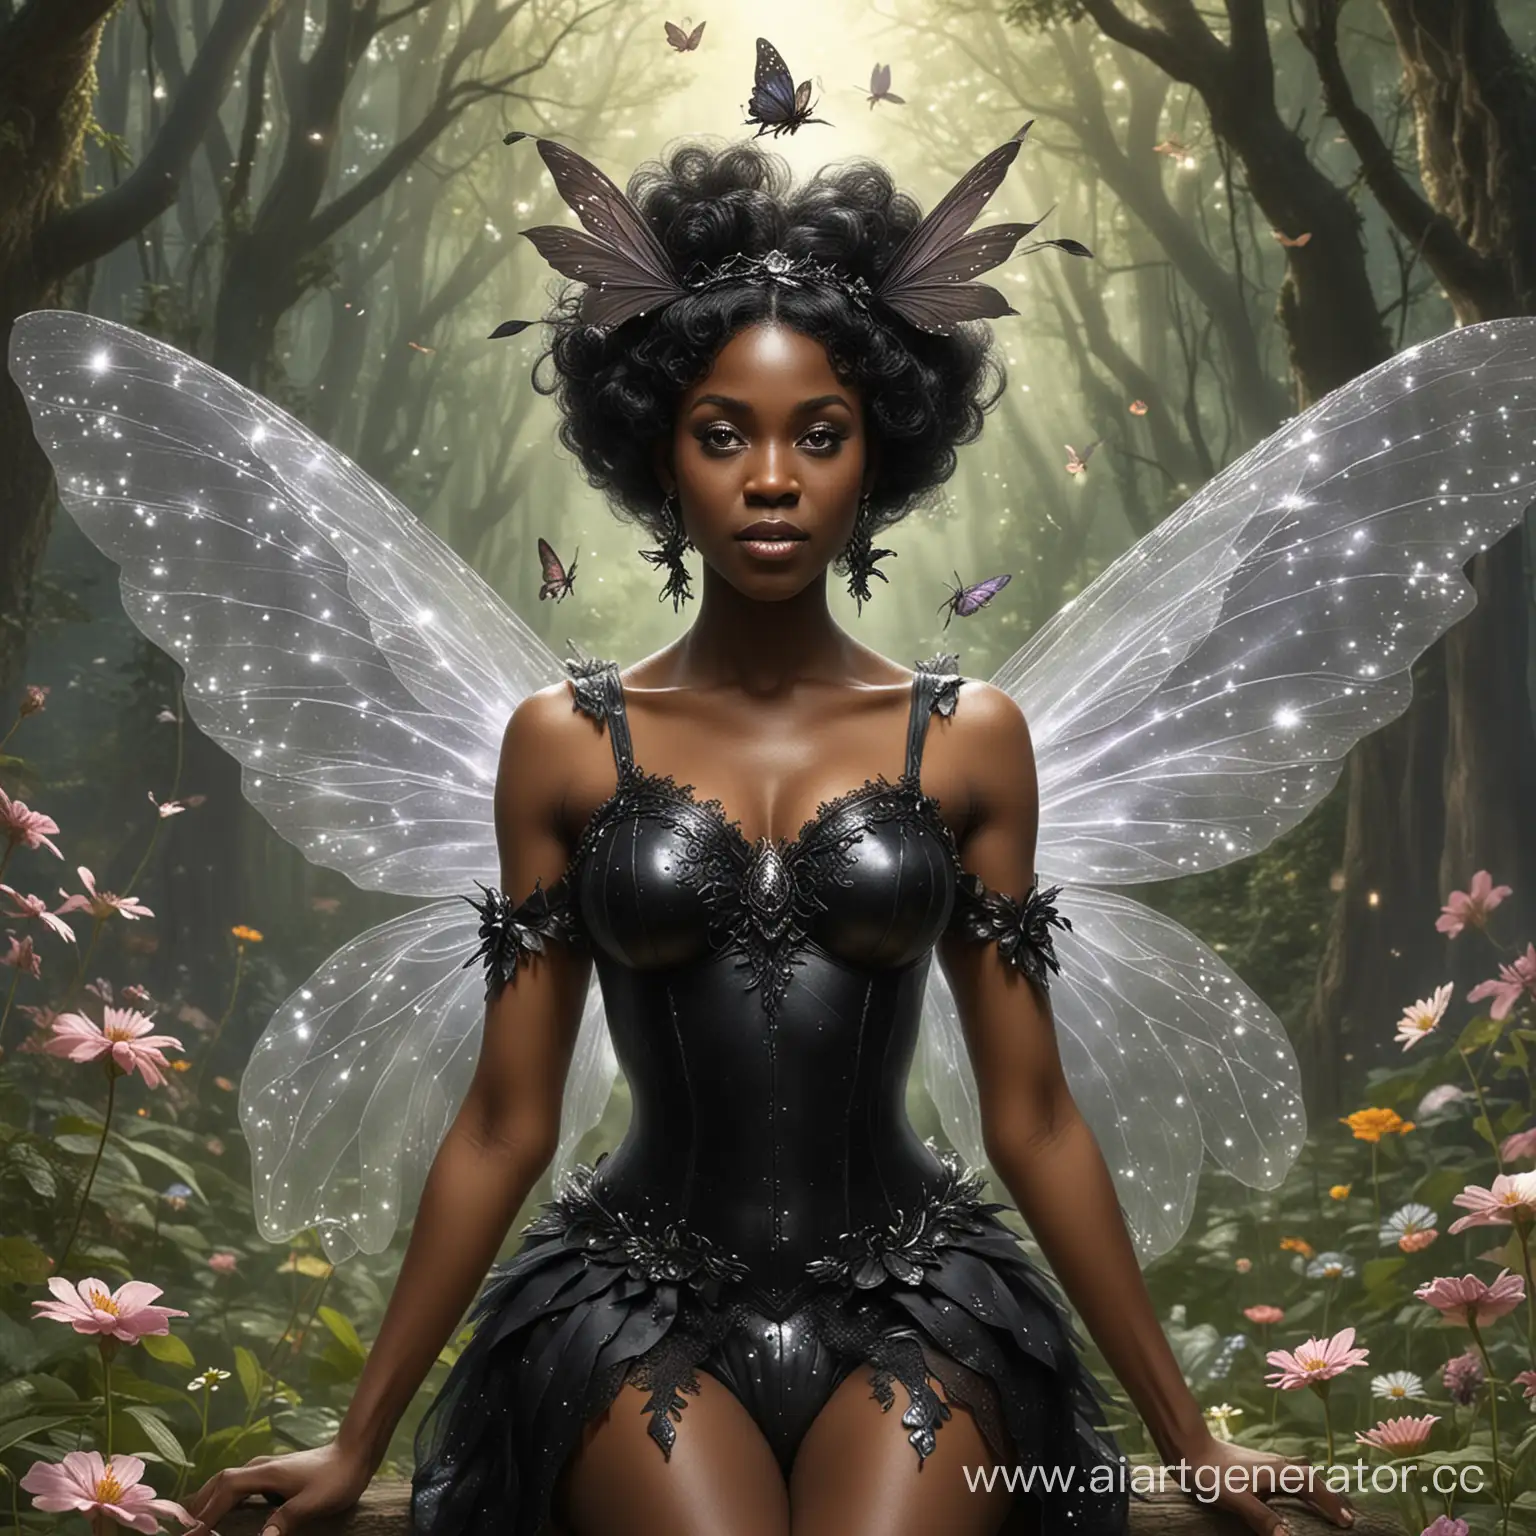 Empowering-Black-Fairy-Leads-Gathering-of-Fellow-Fairies